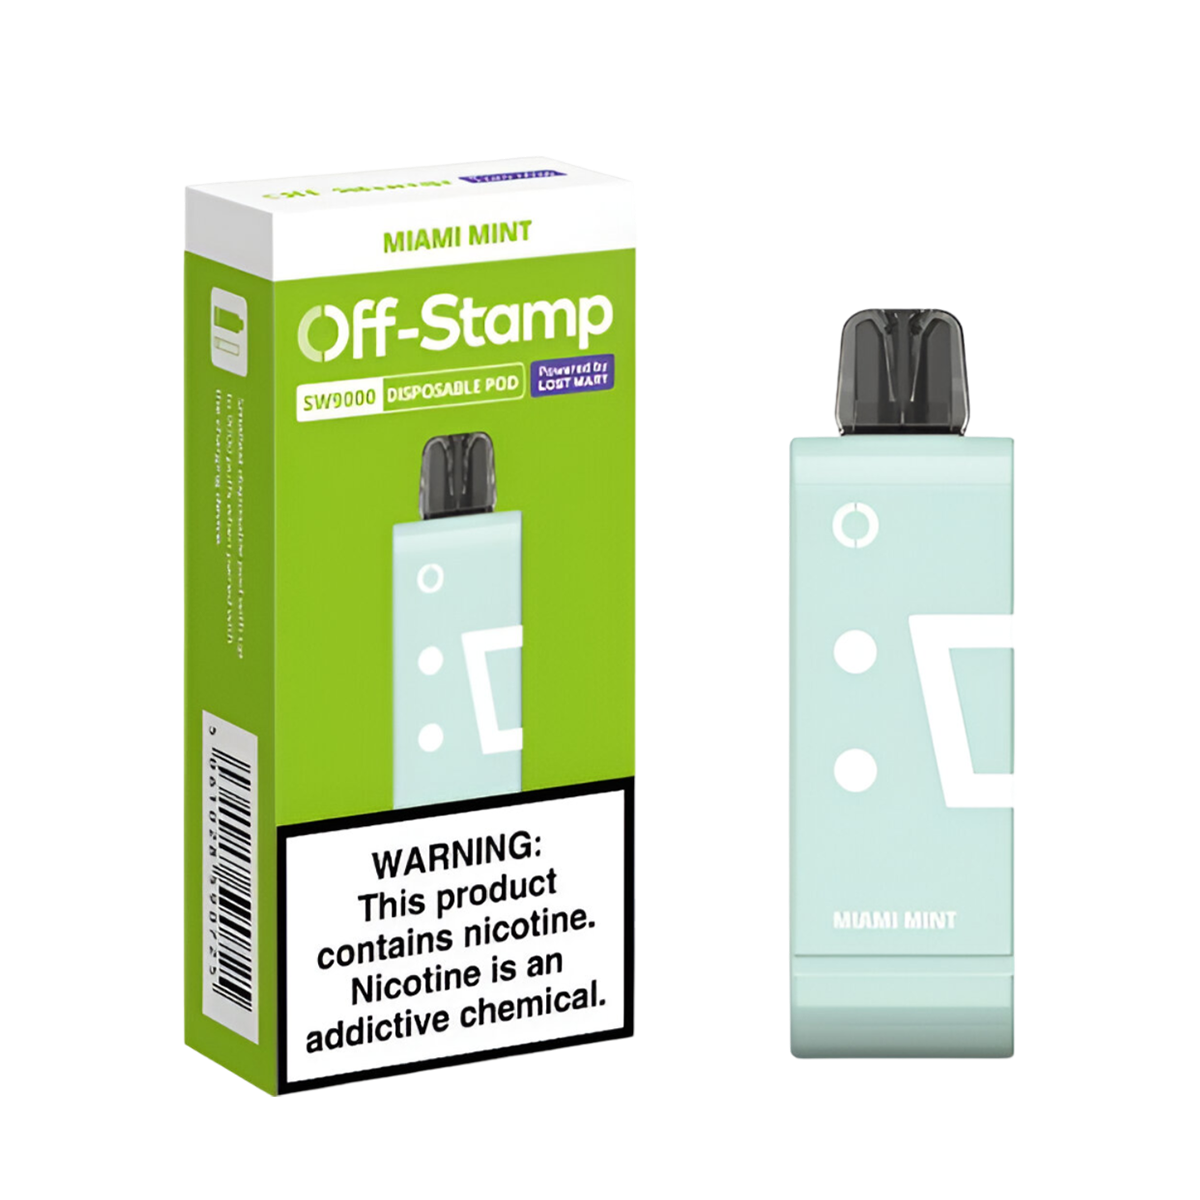 OFF Stamp SW9000 Disposable Vape Miami Mint  